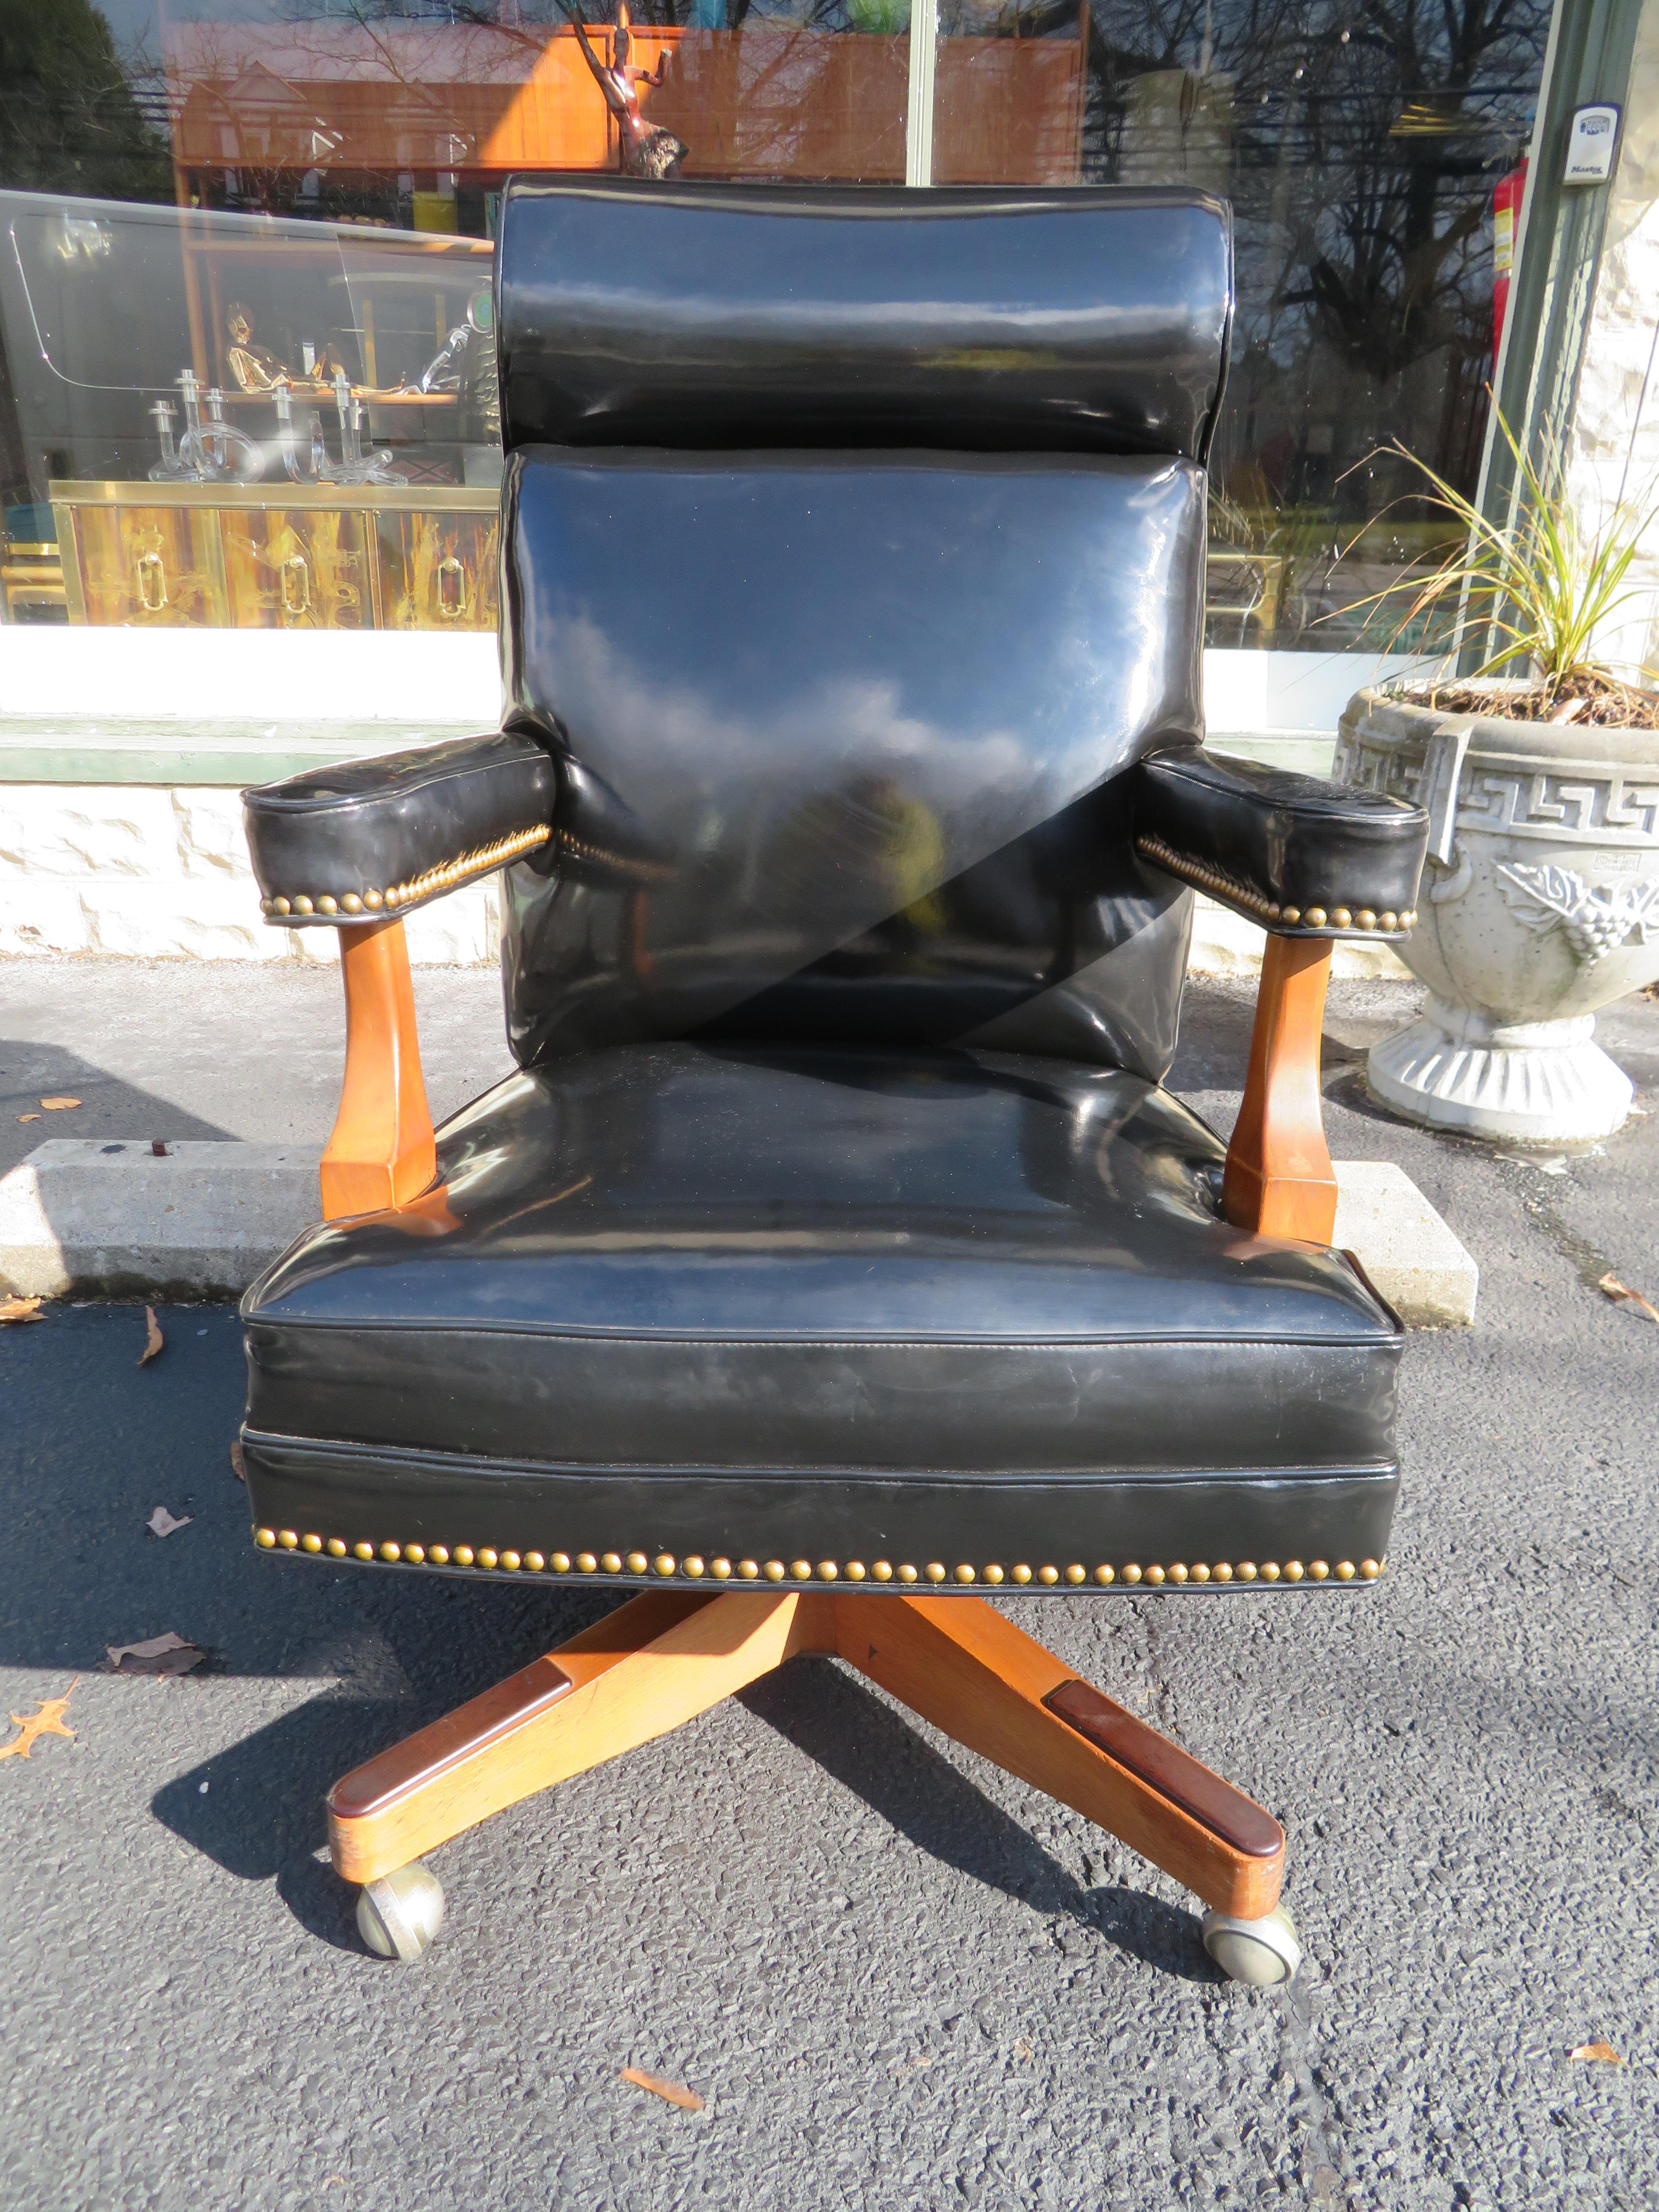 Handsome patent leather oversized rolling executive desk chair. This piece is stunning and impressive in person with its original black patent leather upholstery and brass nailhead details. And talk about comfortable this chair swivels and leans